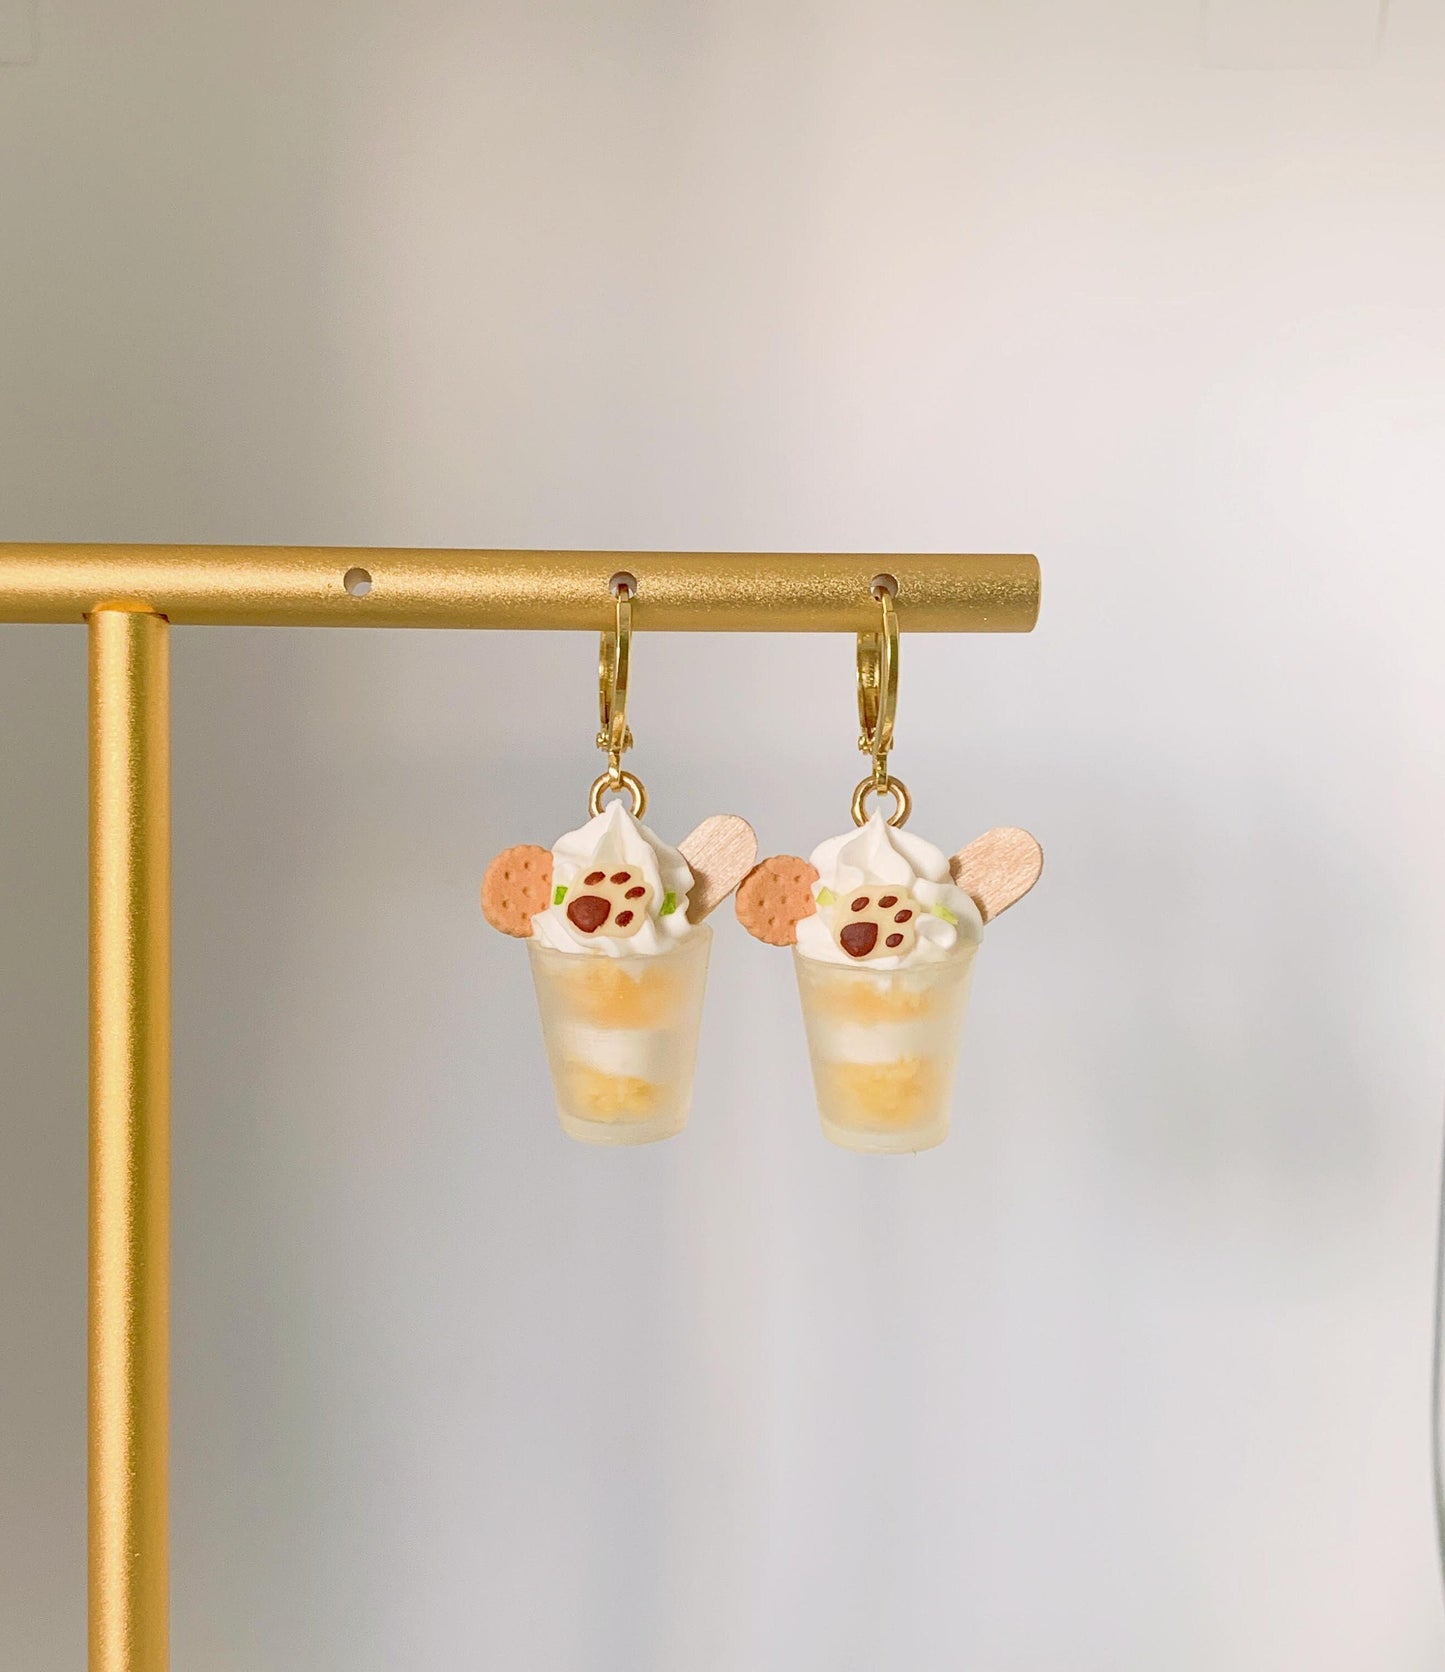 The Pawppuccino Earrings